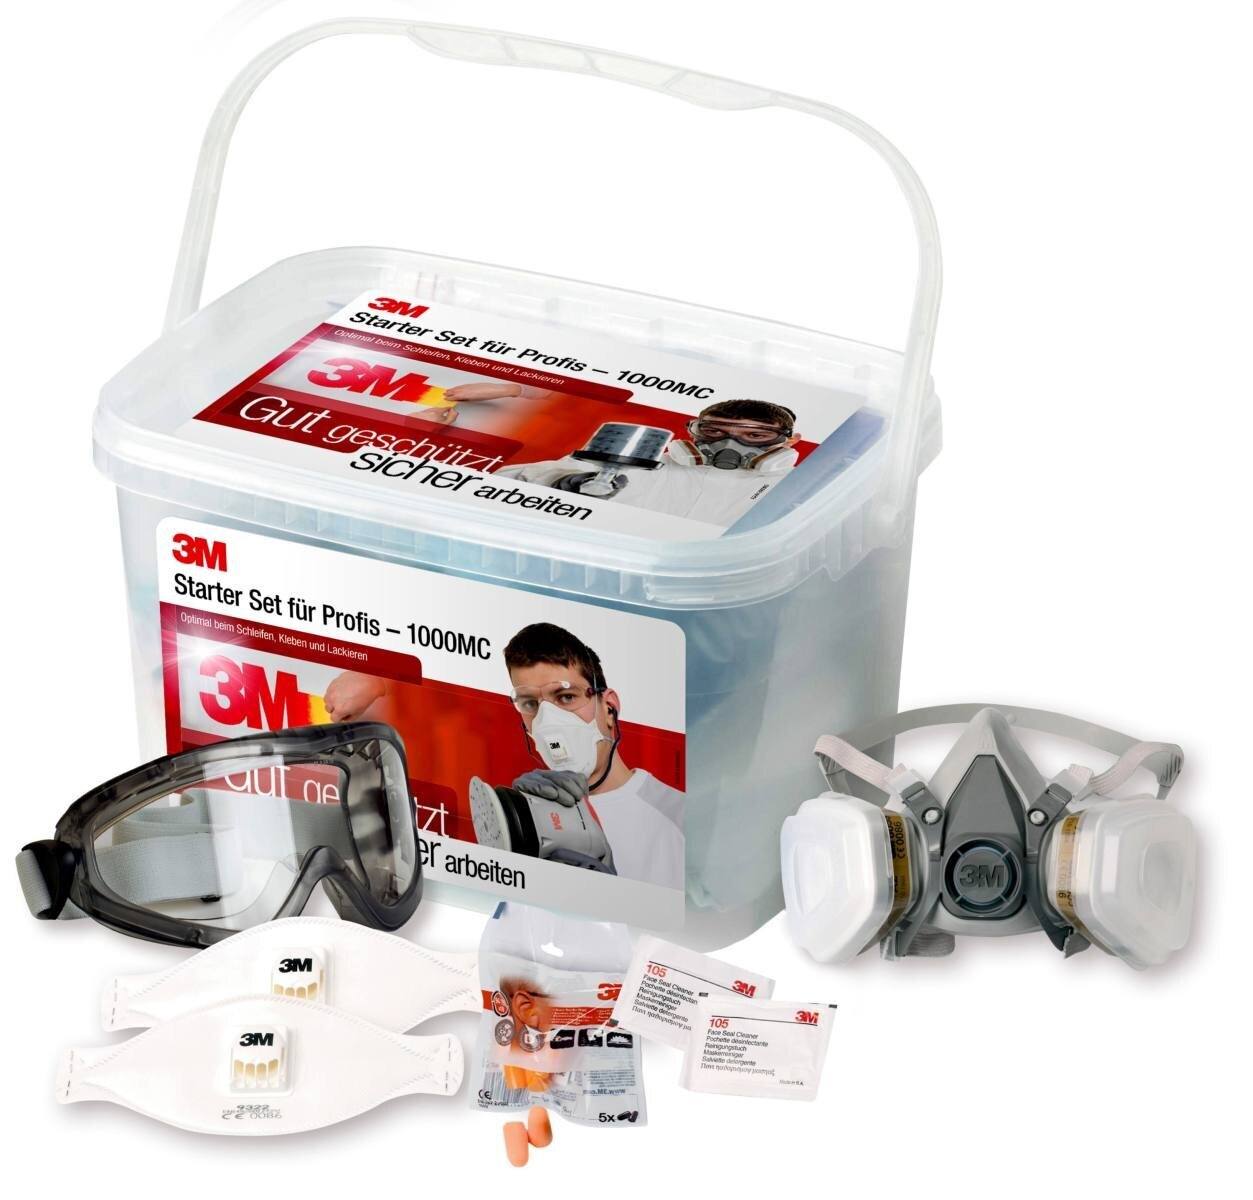 3M Safety Box 1000MCWE Contents: 1 x half mask 6200M, 2 x gas filter 6055 A2, 2 x particle filter 5935 P3R, 2 x 501, 2 x particle masks 9322 , 8 x ear plugs 1100, 1 x full vision goggles 2890SA